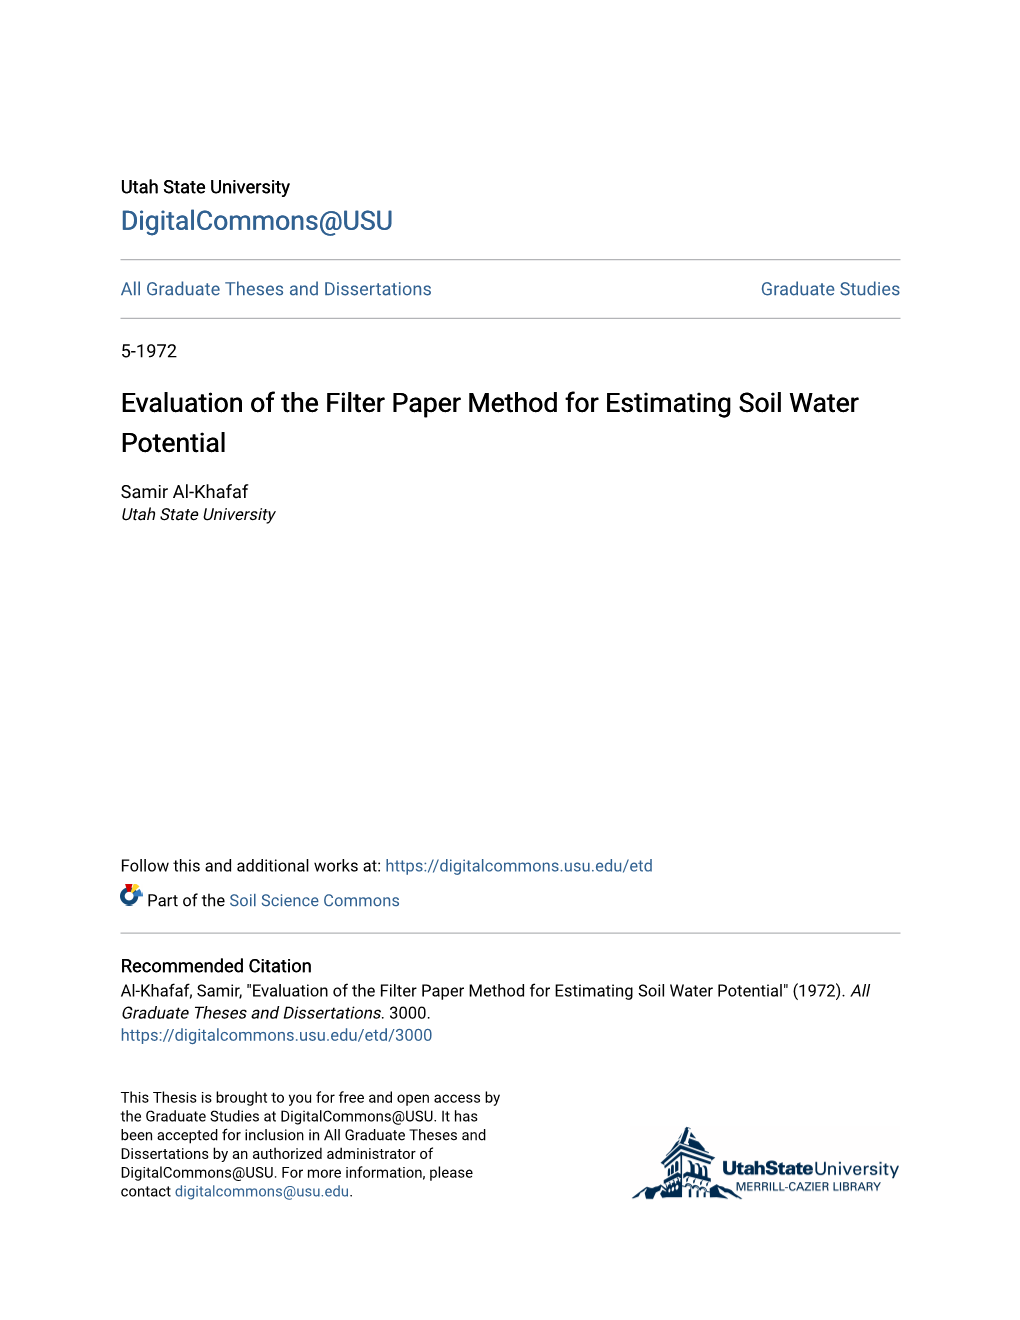 Evaluation of the Filter Paper Method for Estimating Soil Water Potential